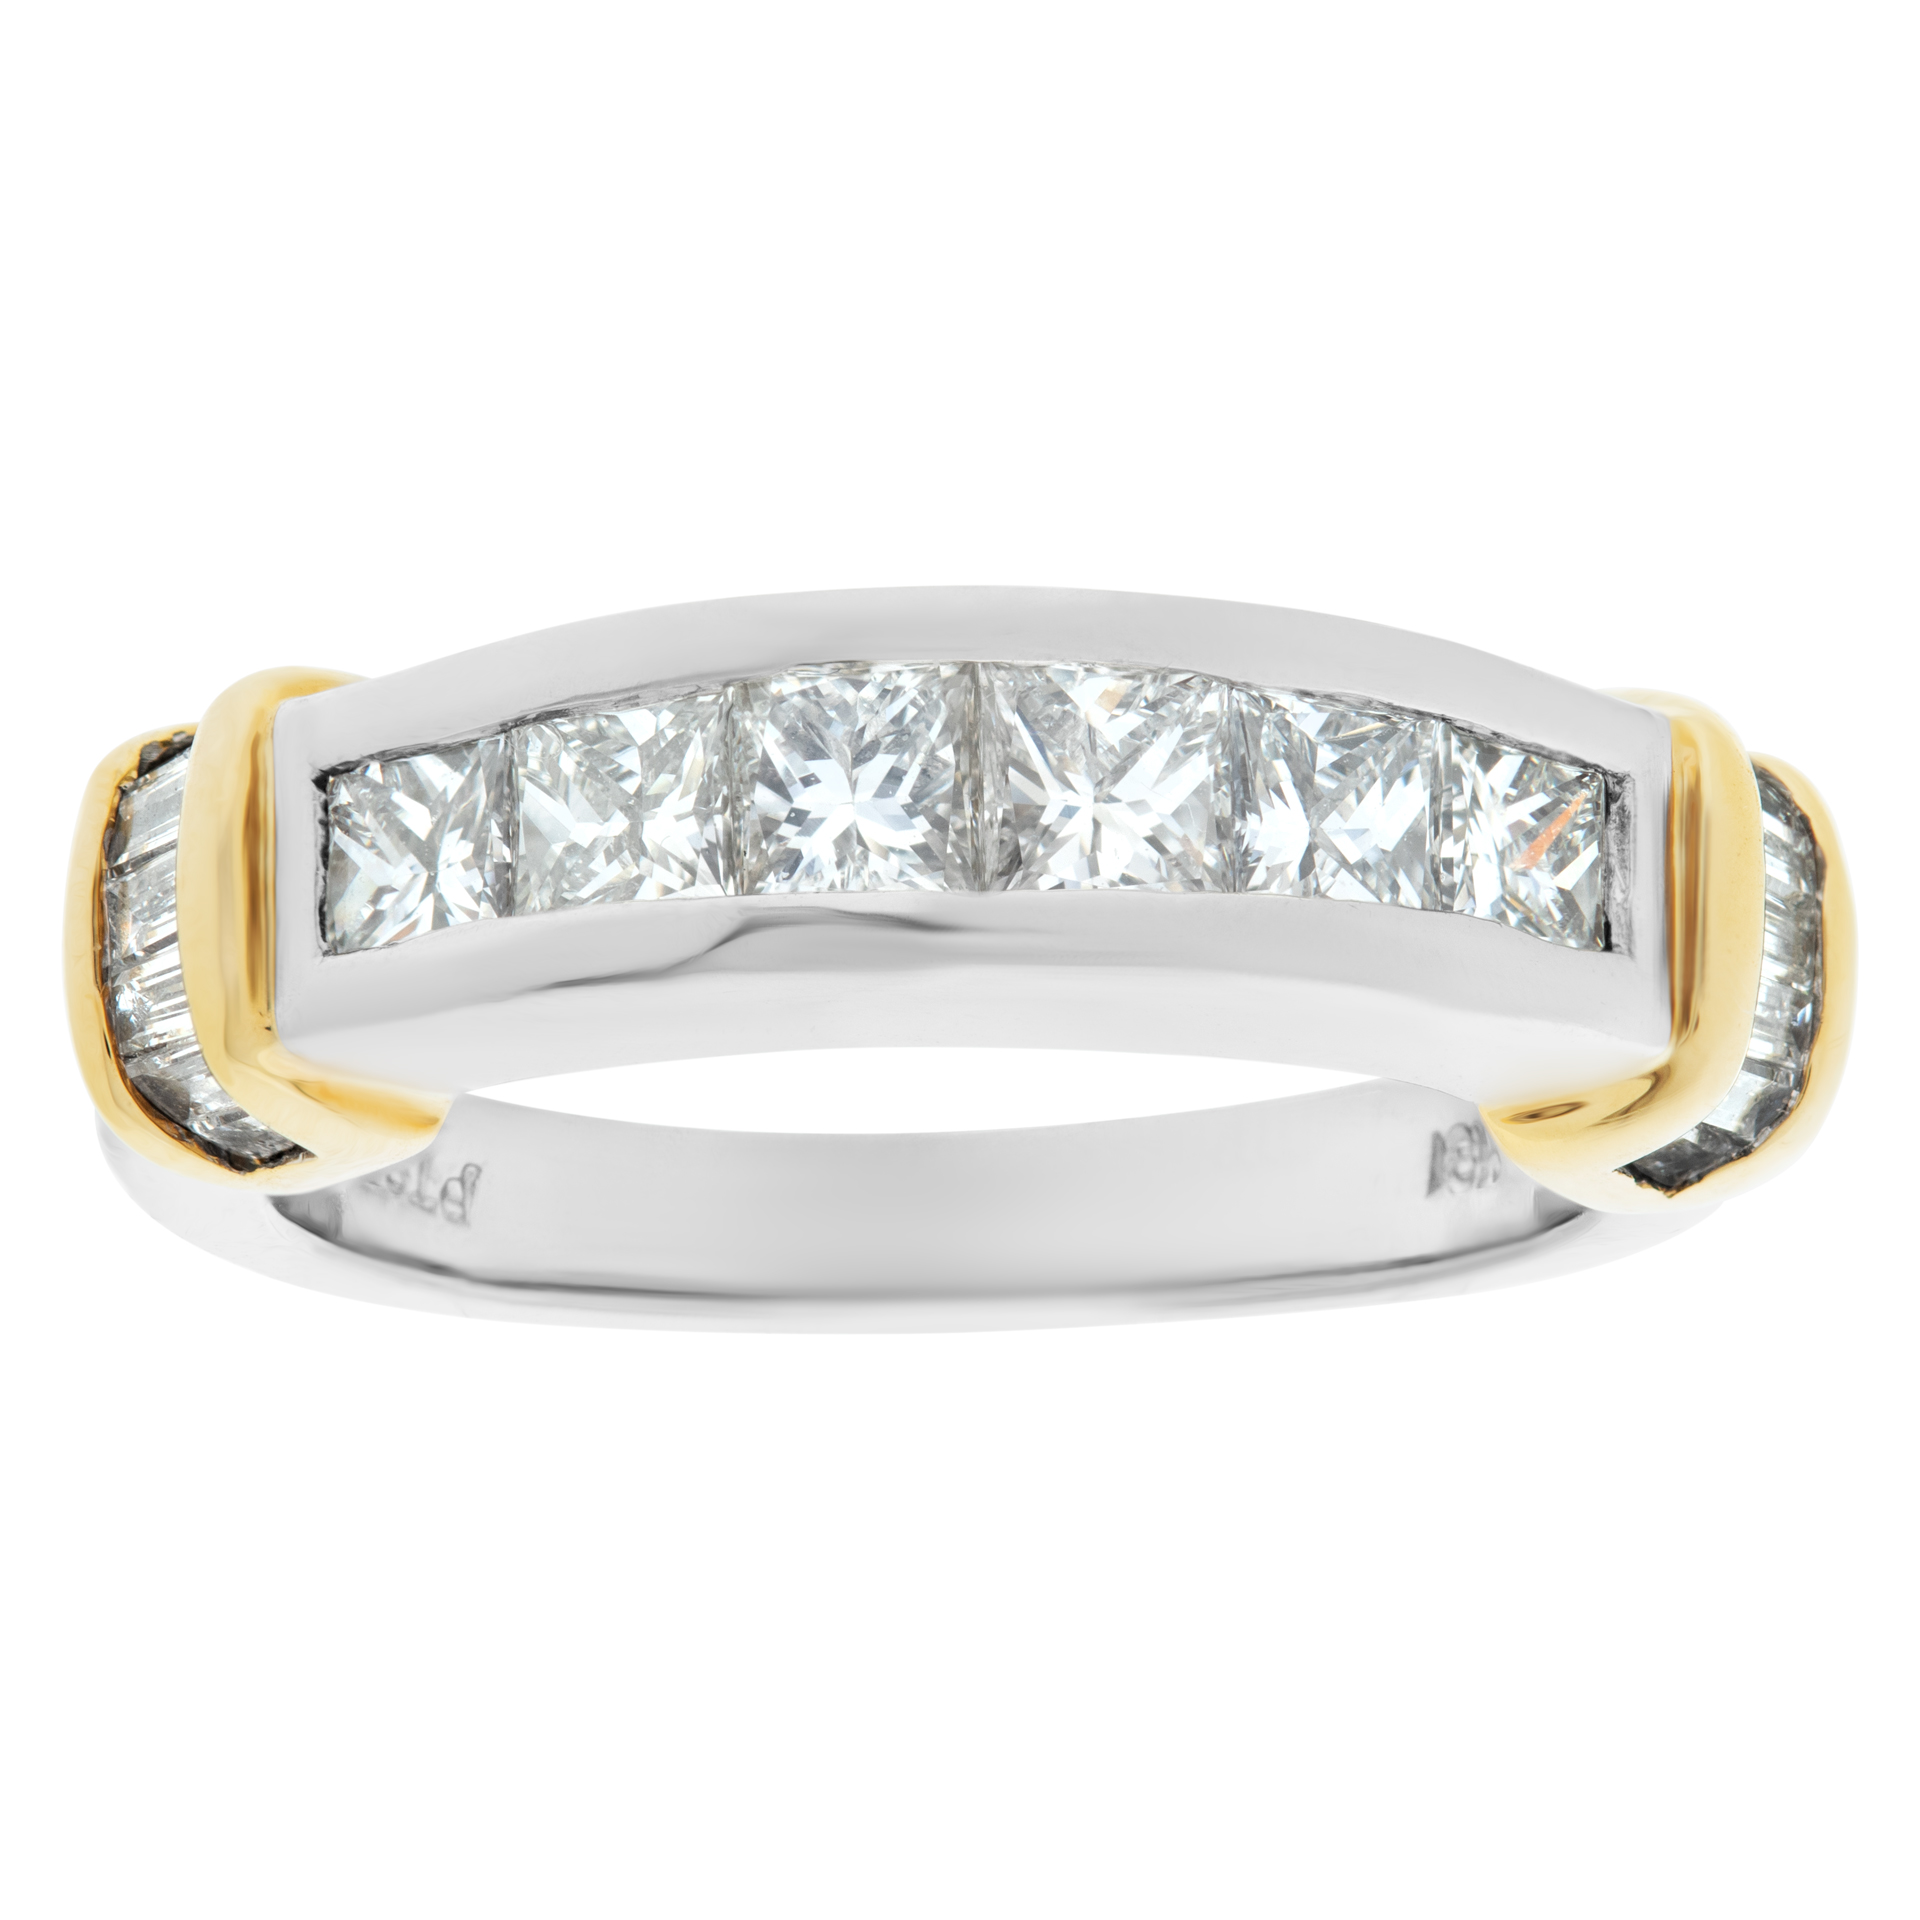 Platinum and 18k gold diamond ring with app. 1.50 cts in brilliant cut diamonds image 1